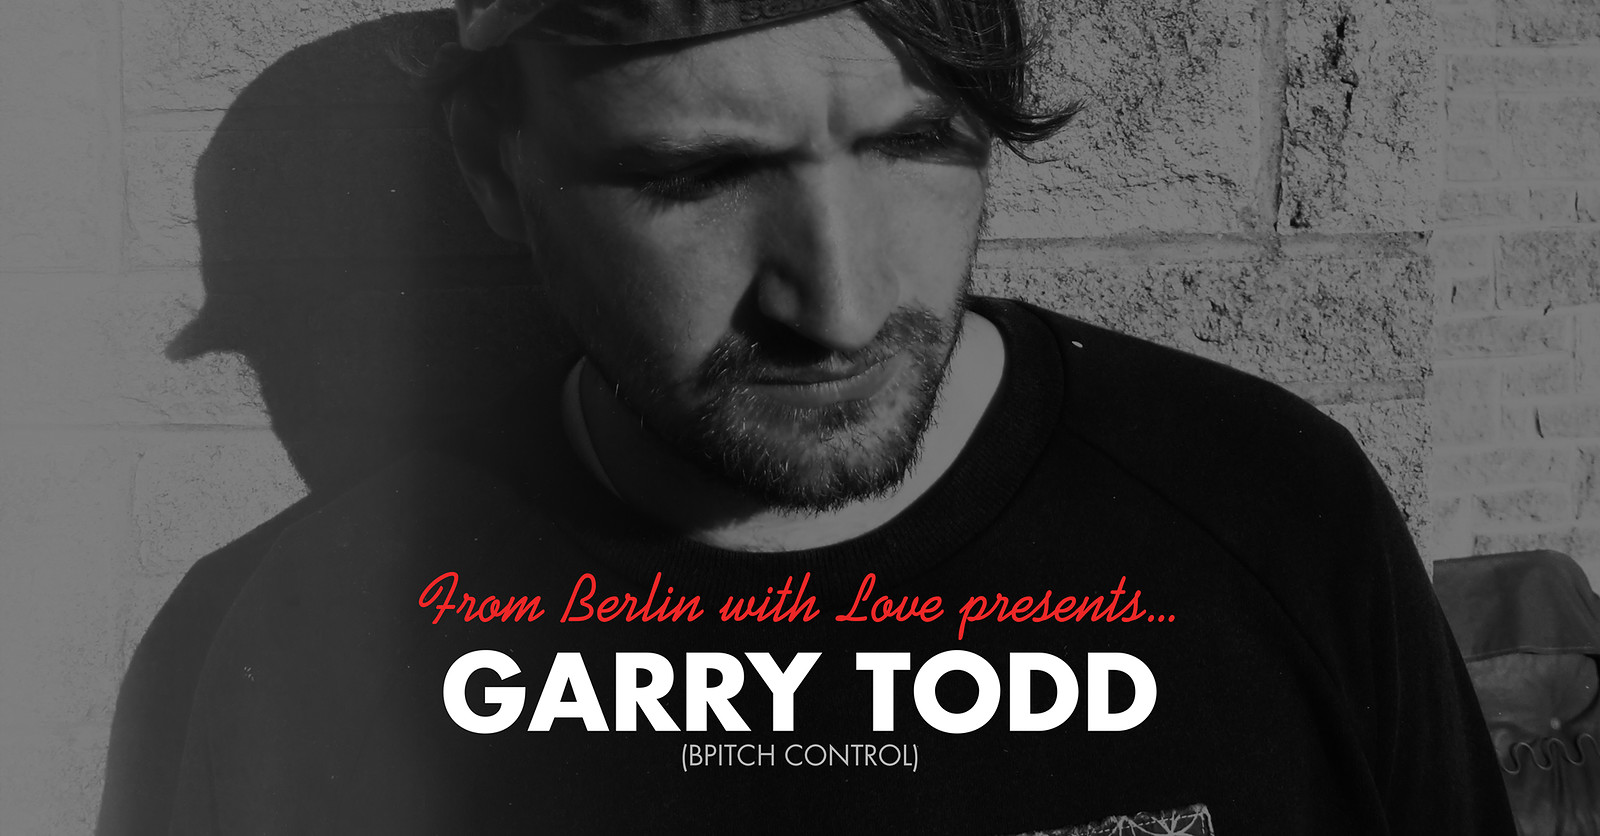 From Berlin with Love presents Garry Tod at From Berlin with Love